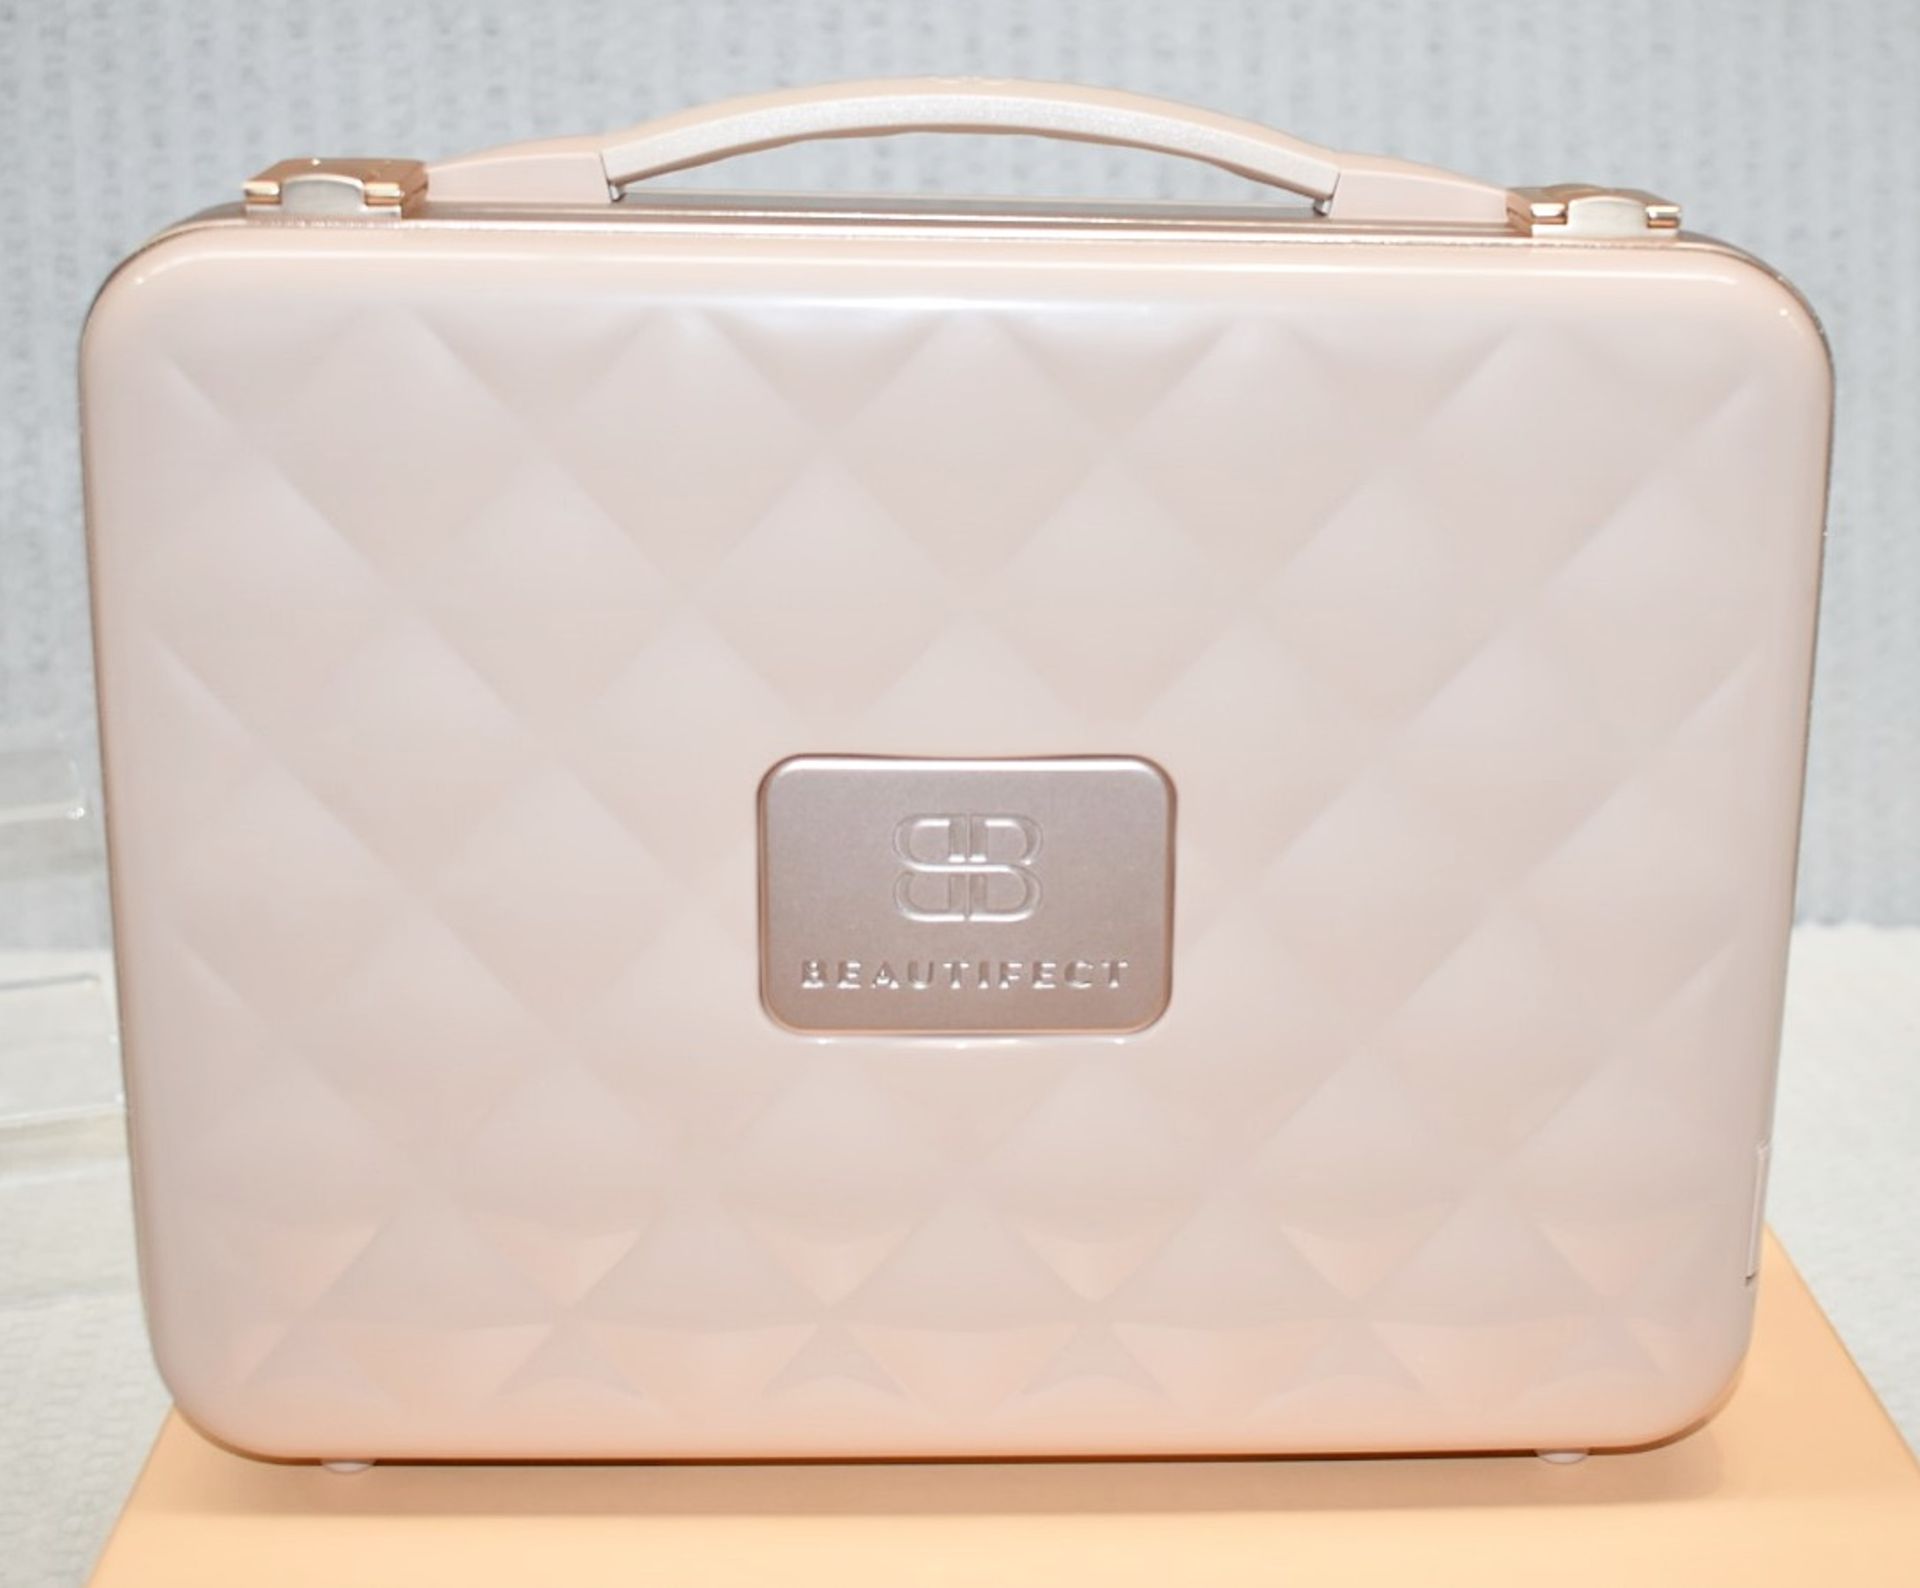 1 x BEAUTIFECT 'Beautifect Box' Make-Up Carry Case With Built-in Mirror - RRP £279.00 - Image 10 of 13